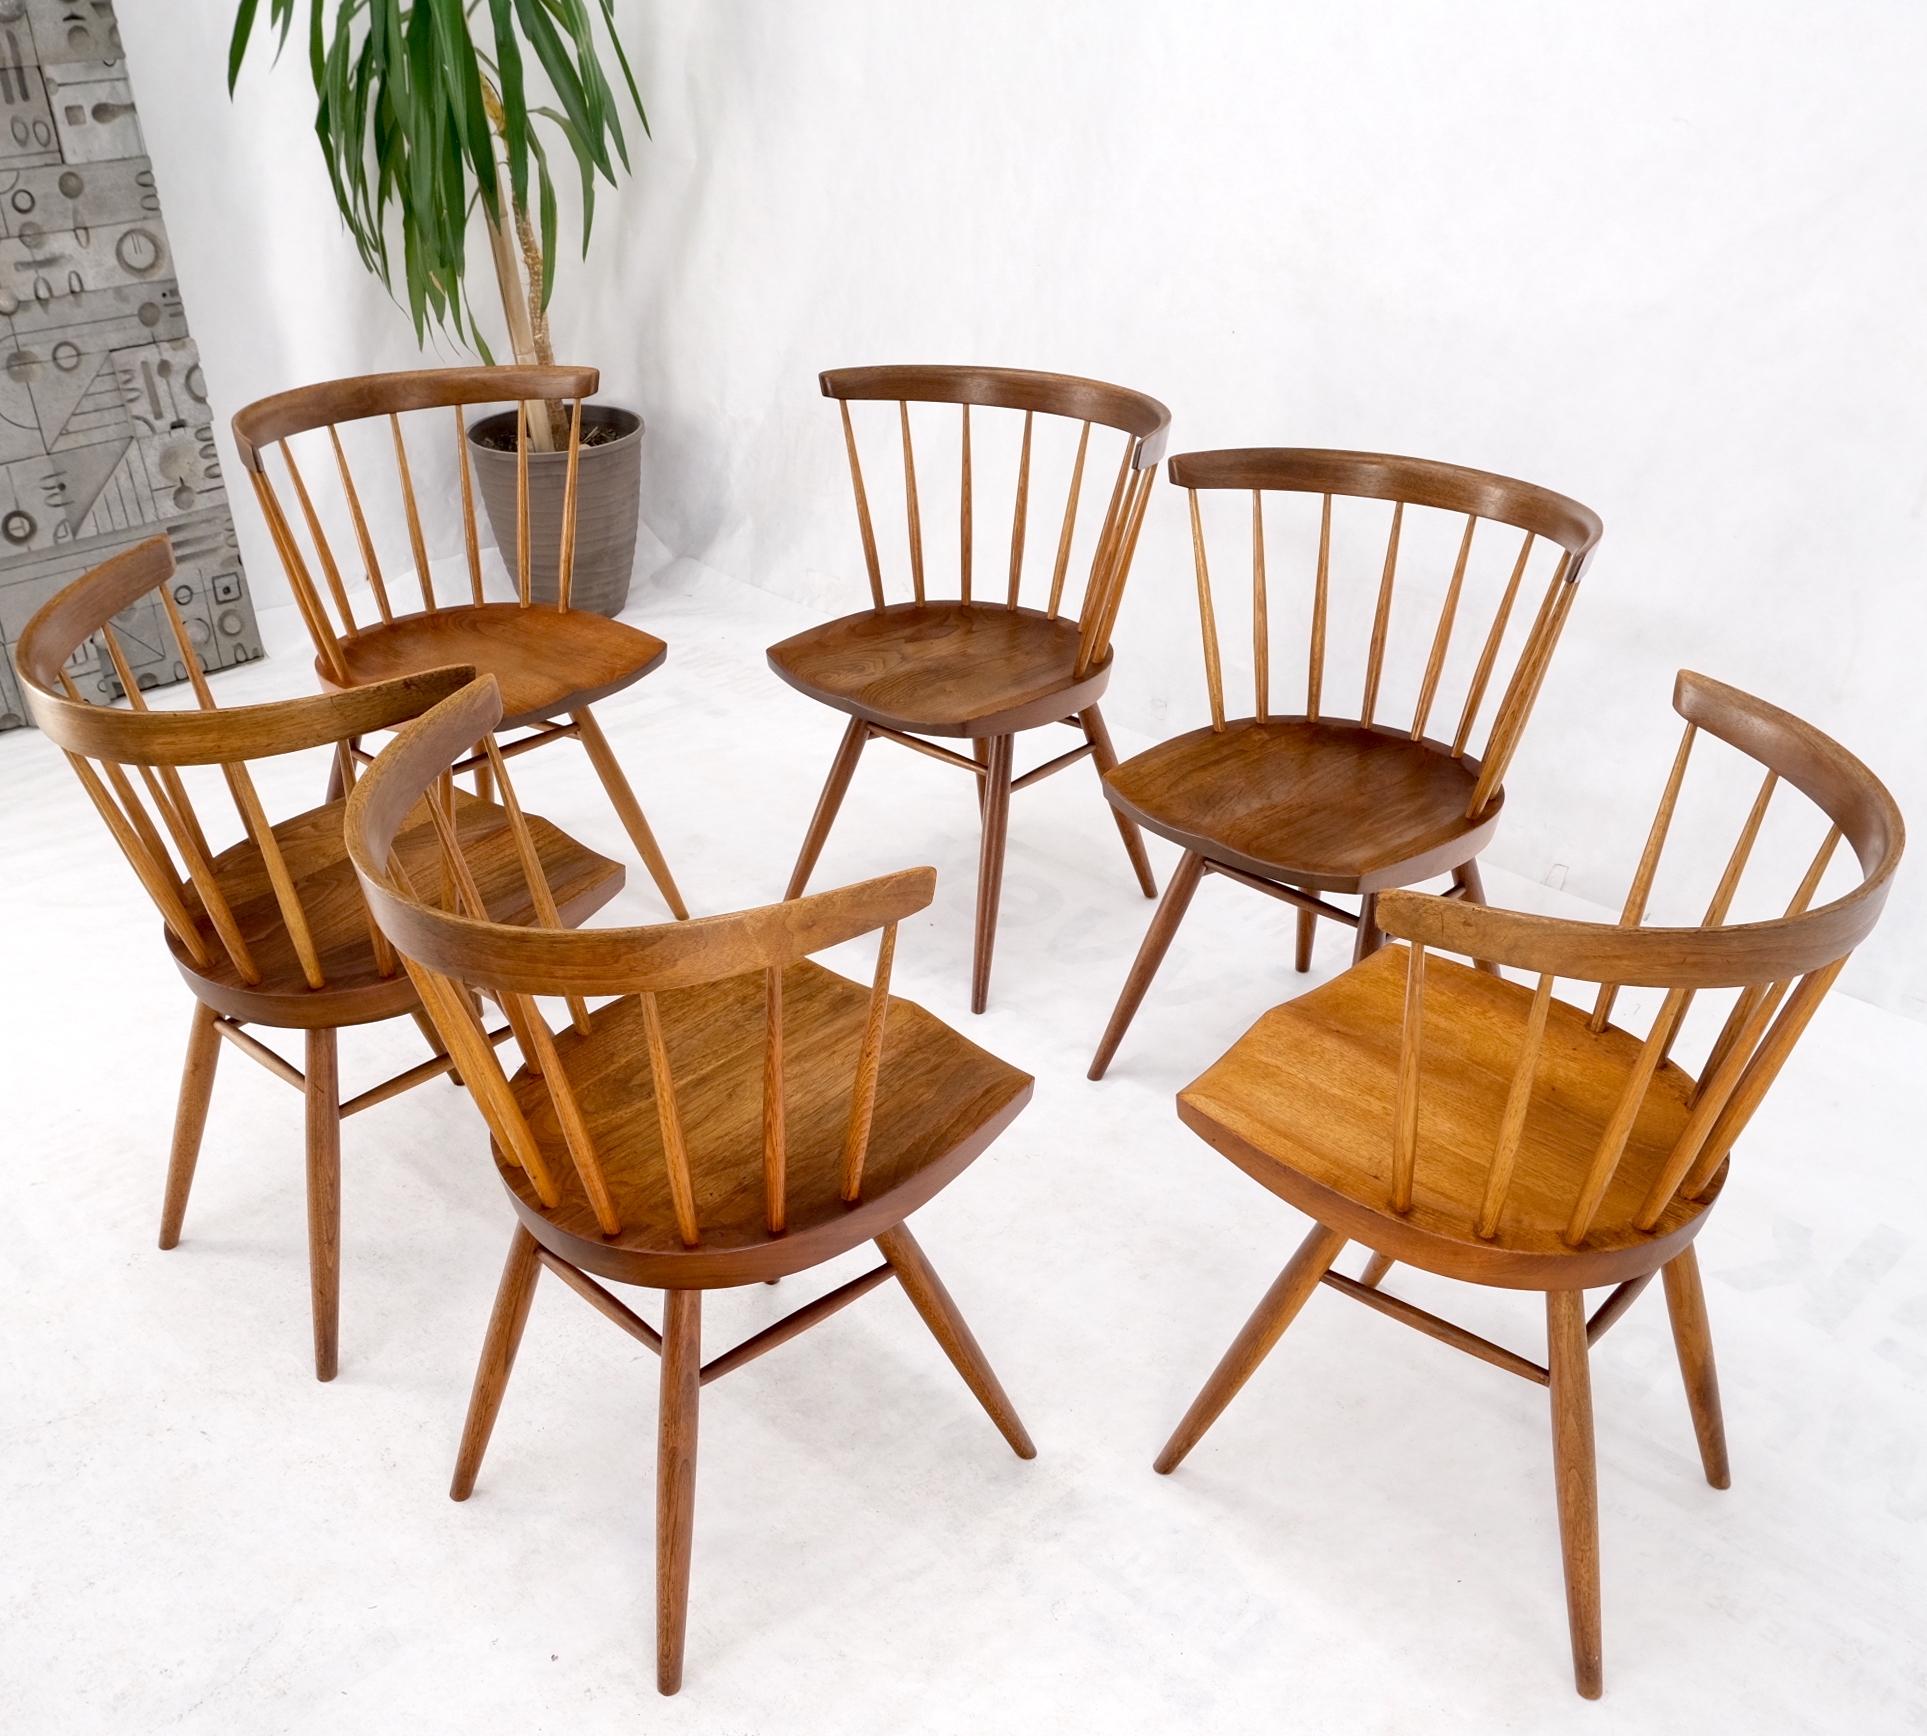 Set of 6 Oiled Walnut Spindle Back Dining Chairs by George Nakashima For Sale 6